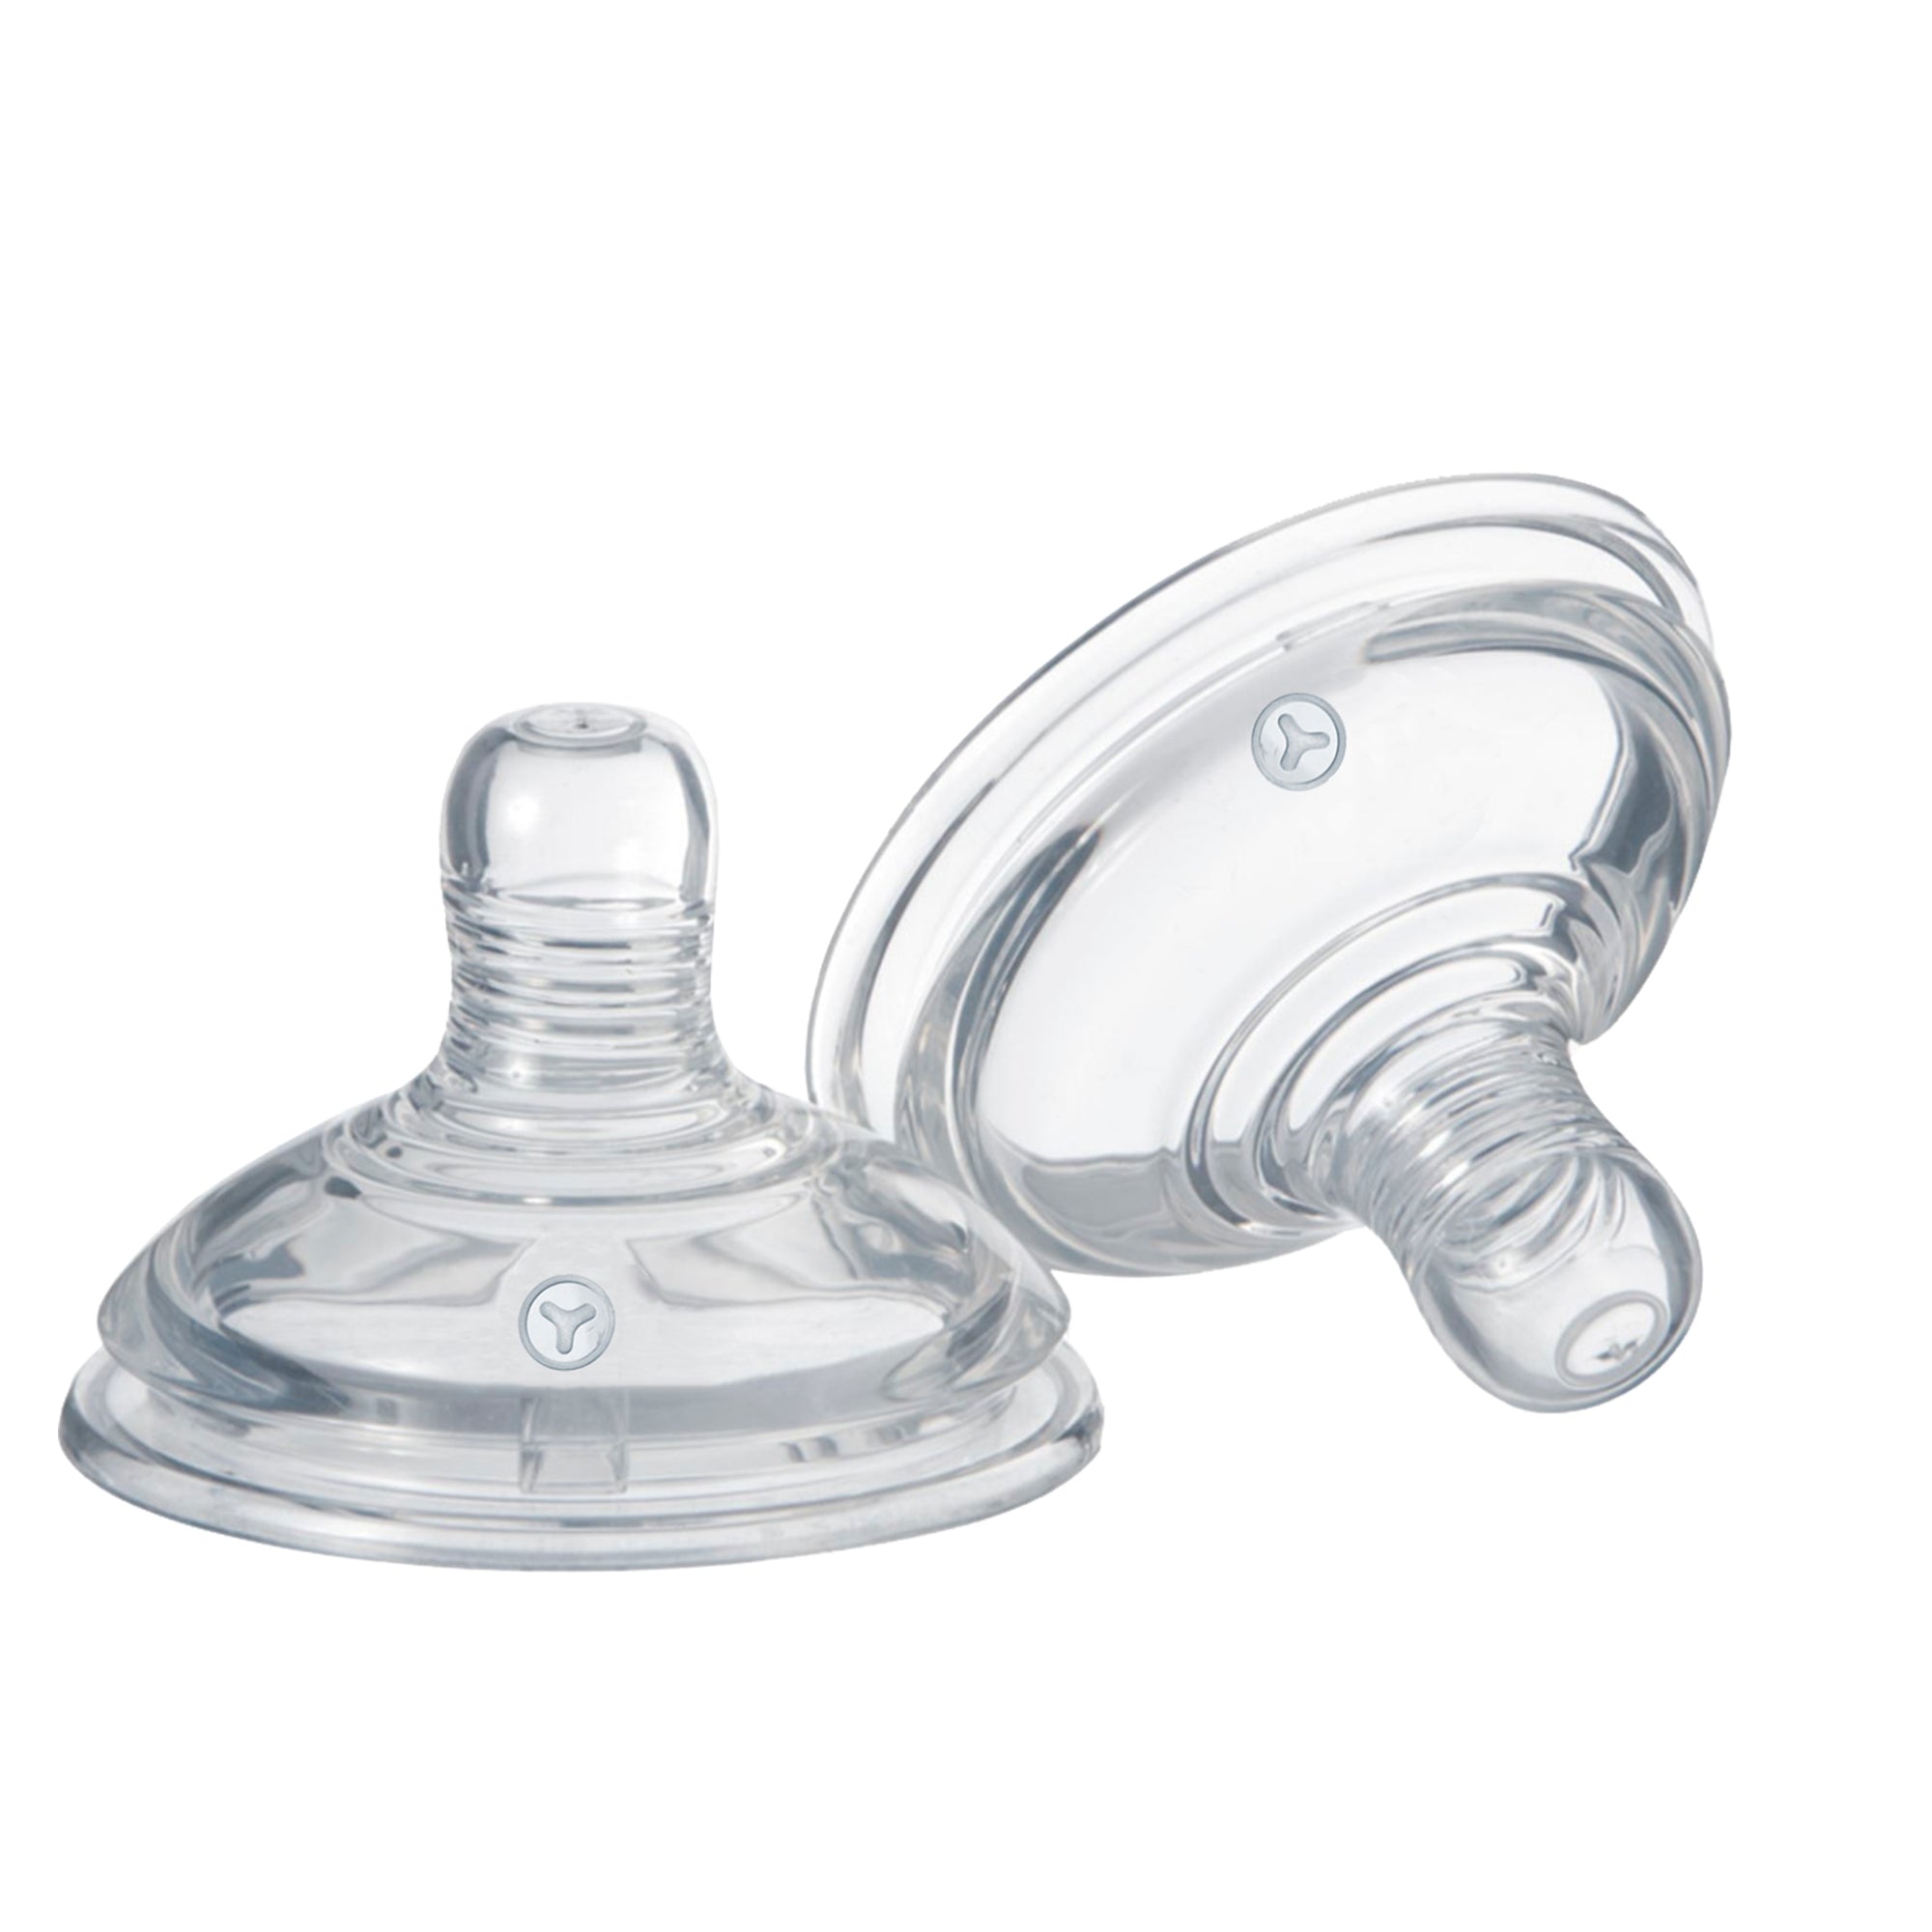 Thick Feed Flow (Y-CUT) Teat Pack Of 2 Tommee Tippee 422142